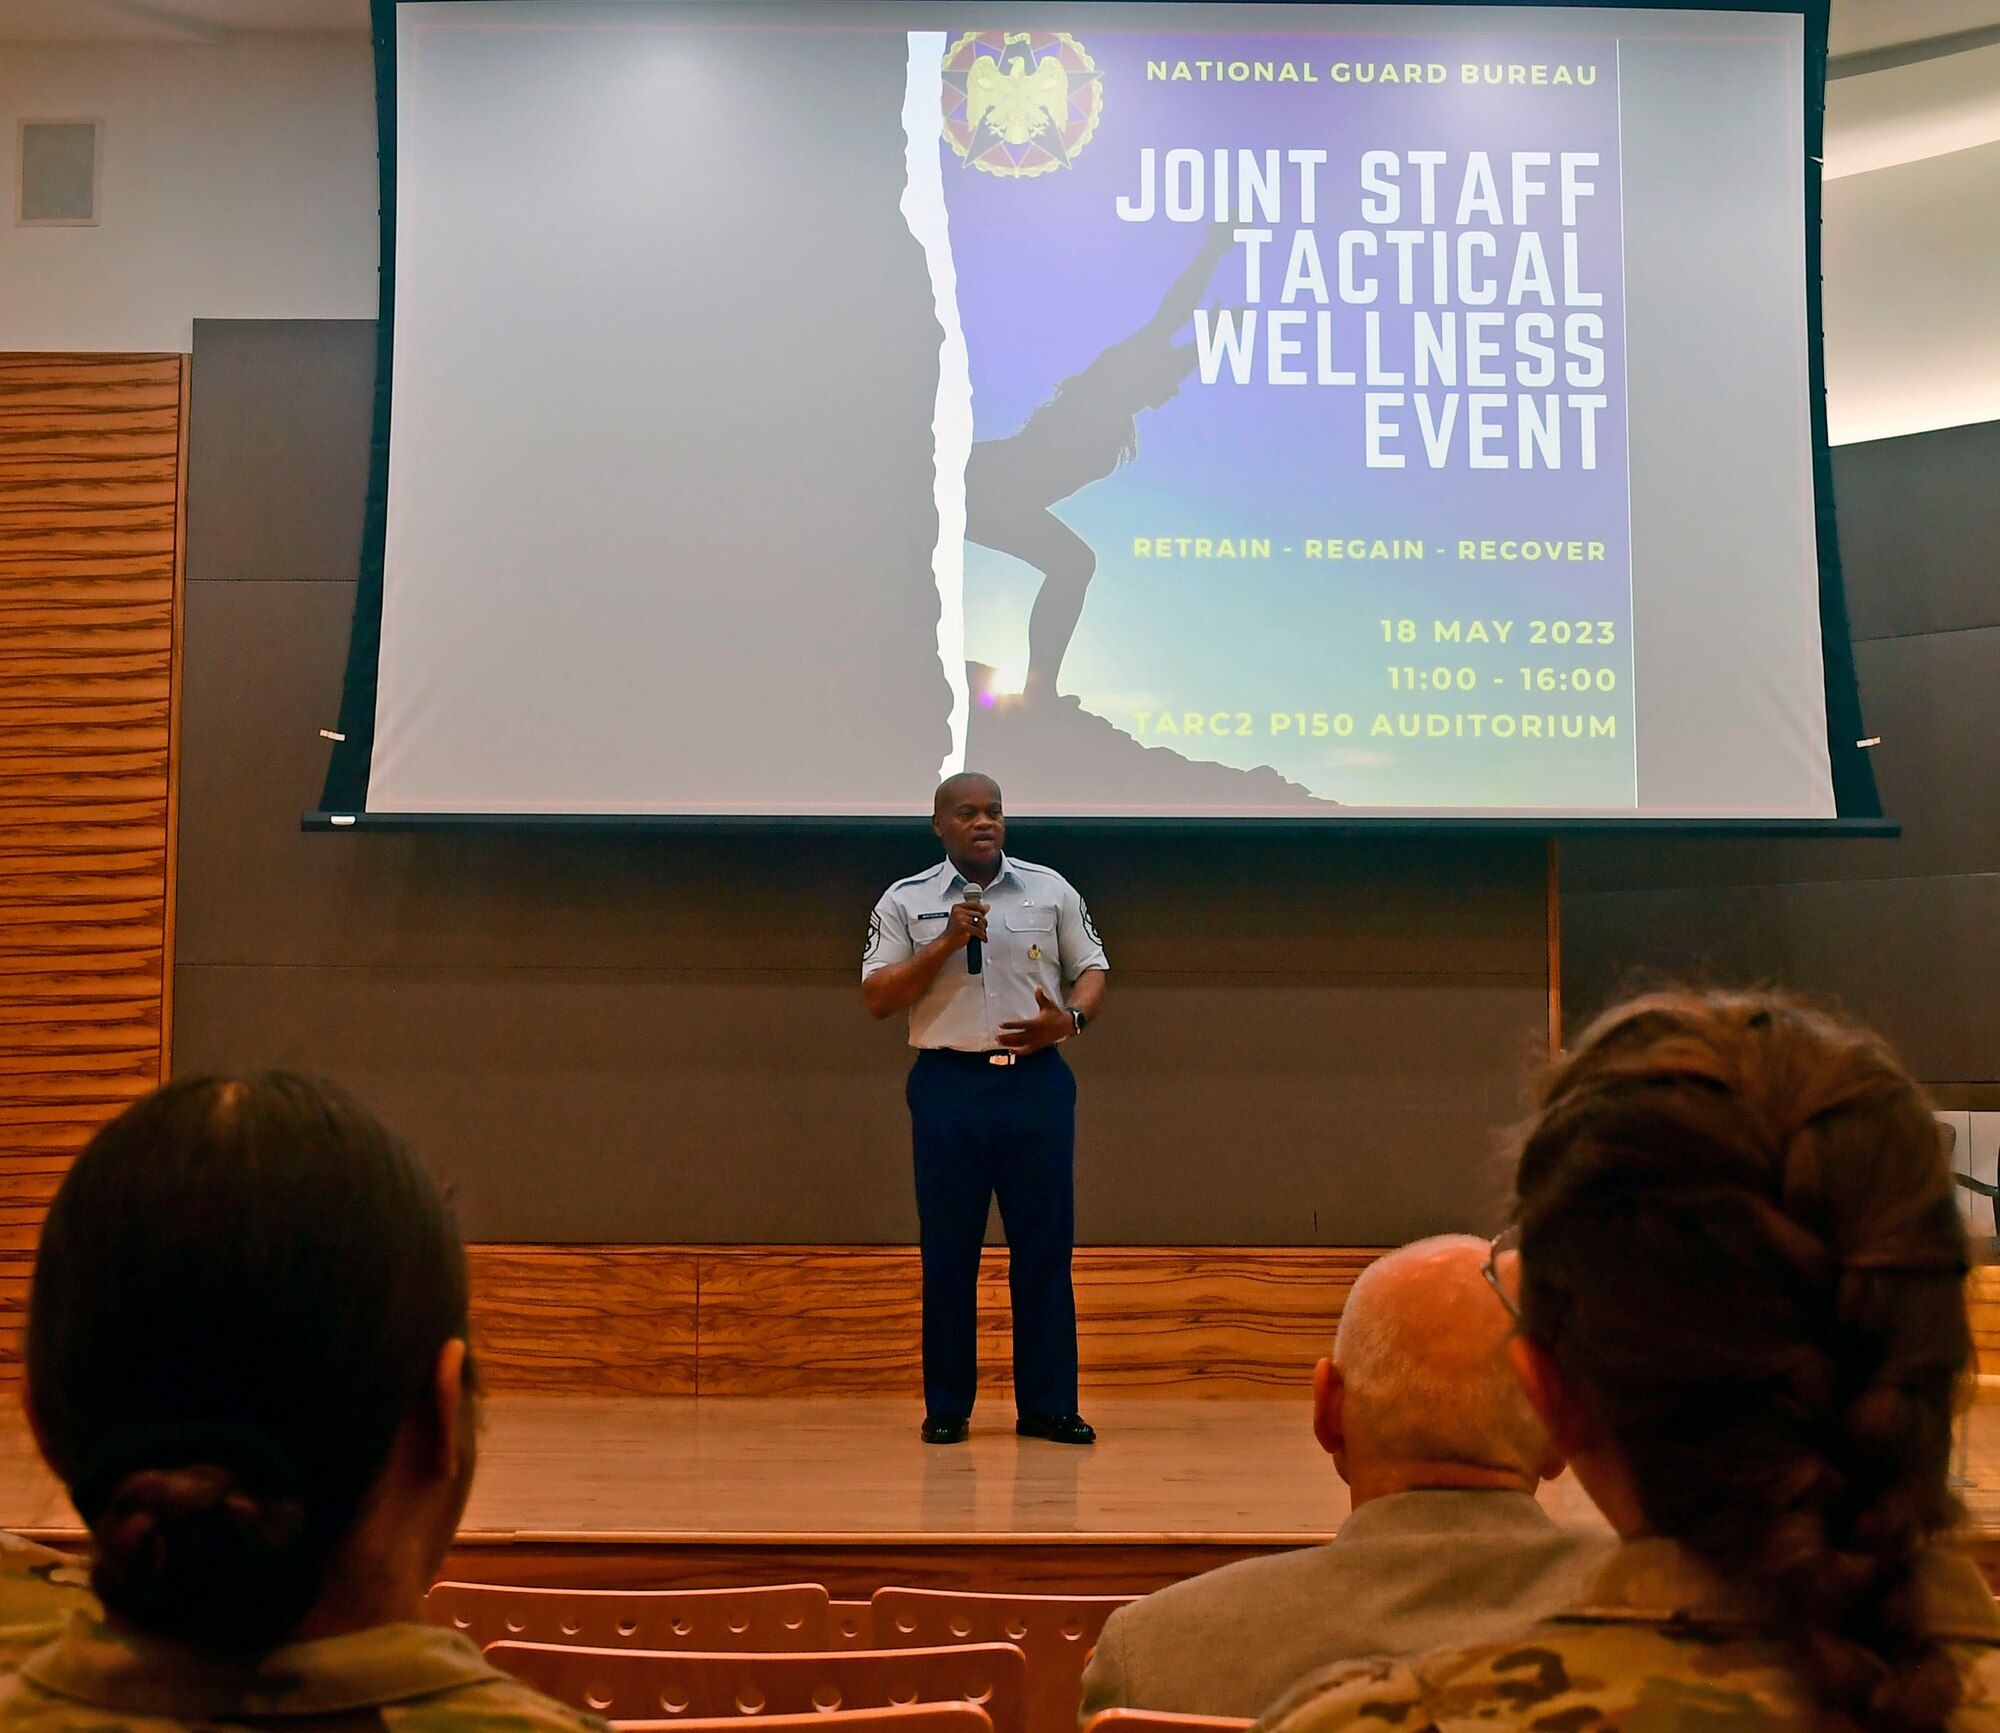 U.S. Air Force Senior Enlisted Advisor Tony Whitehead, SEA to the chief, National Guard Bureau, provides opening remarks during aJoint Staff Tactical Wellness Event May 18, 2023, at the Herbert R. Temple Jr. Army National Guard Readiness Center. The one-day event educated members on resources and practices to improve health and wellness.